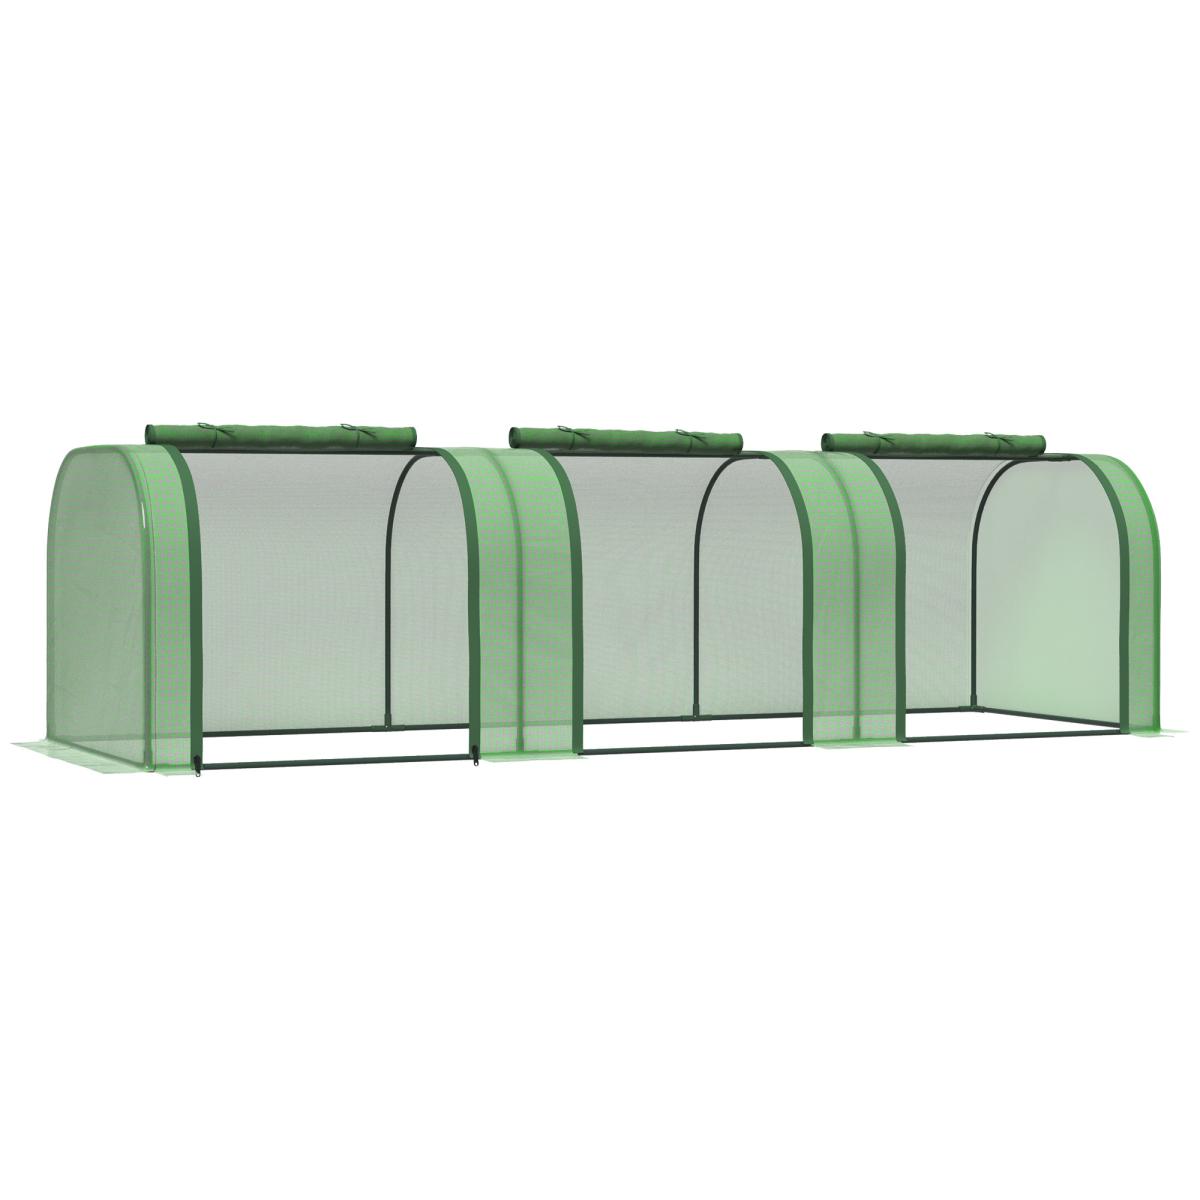 10' x 3' x 2.5' Mini Greenhouse, Portable Tunnel Green House with Roll-Up Zippered Doors, Uv Waterproof Cover, Steel Frame, Green